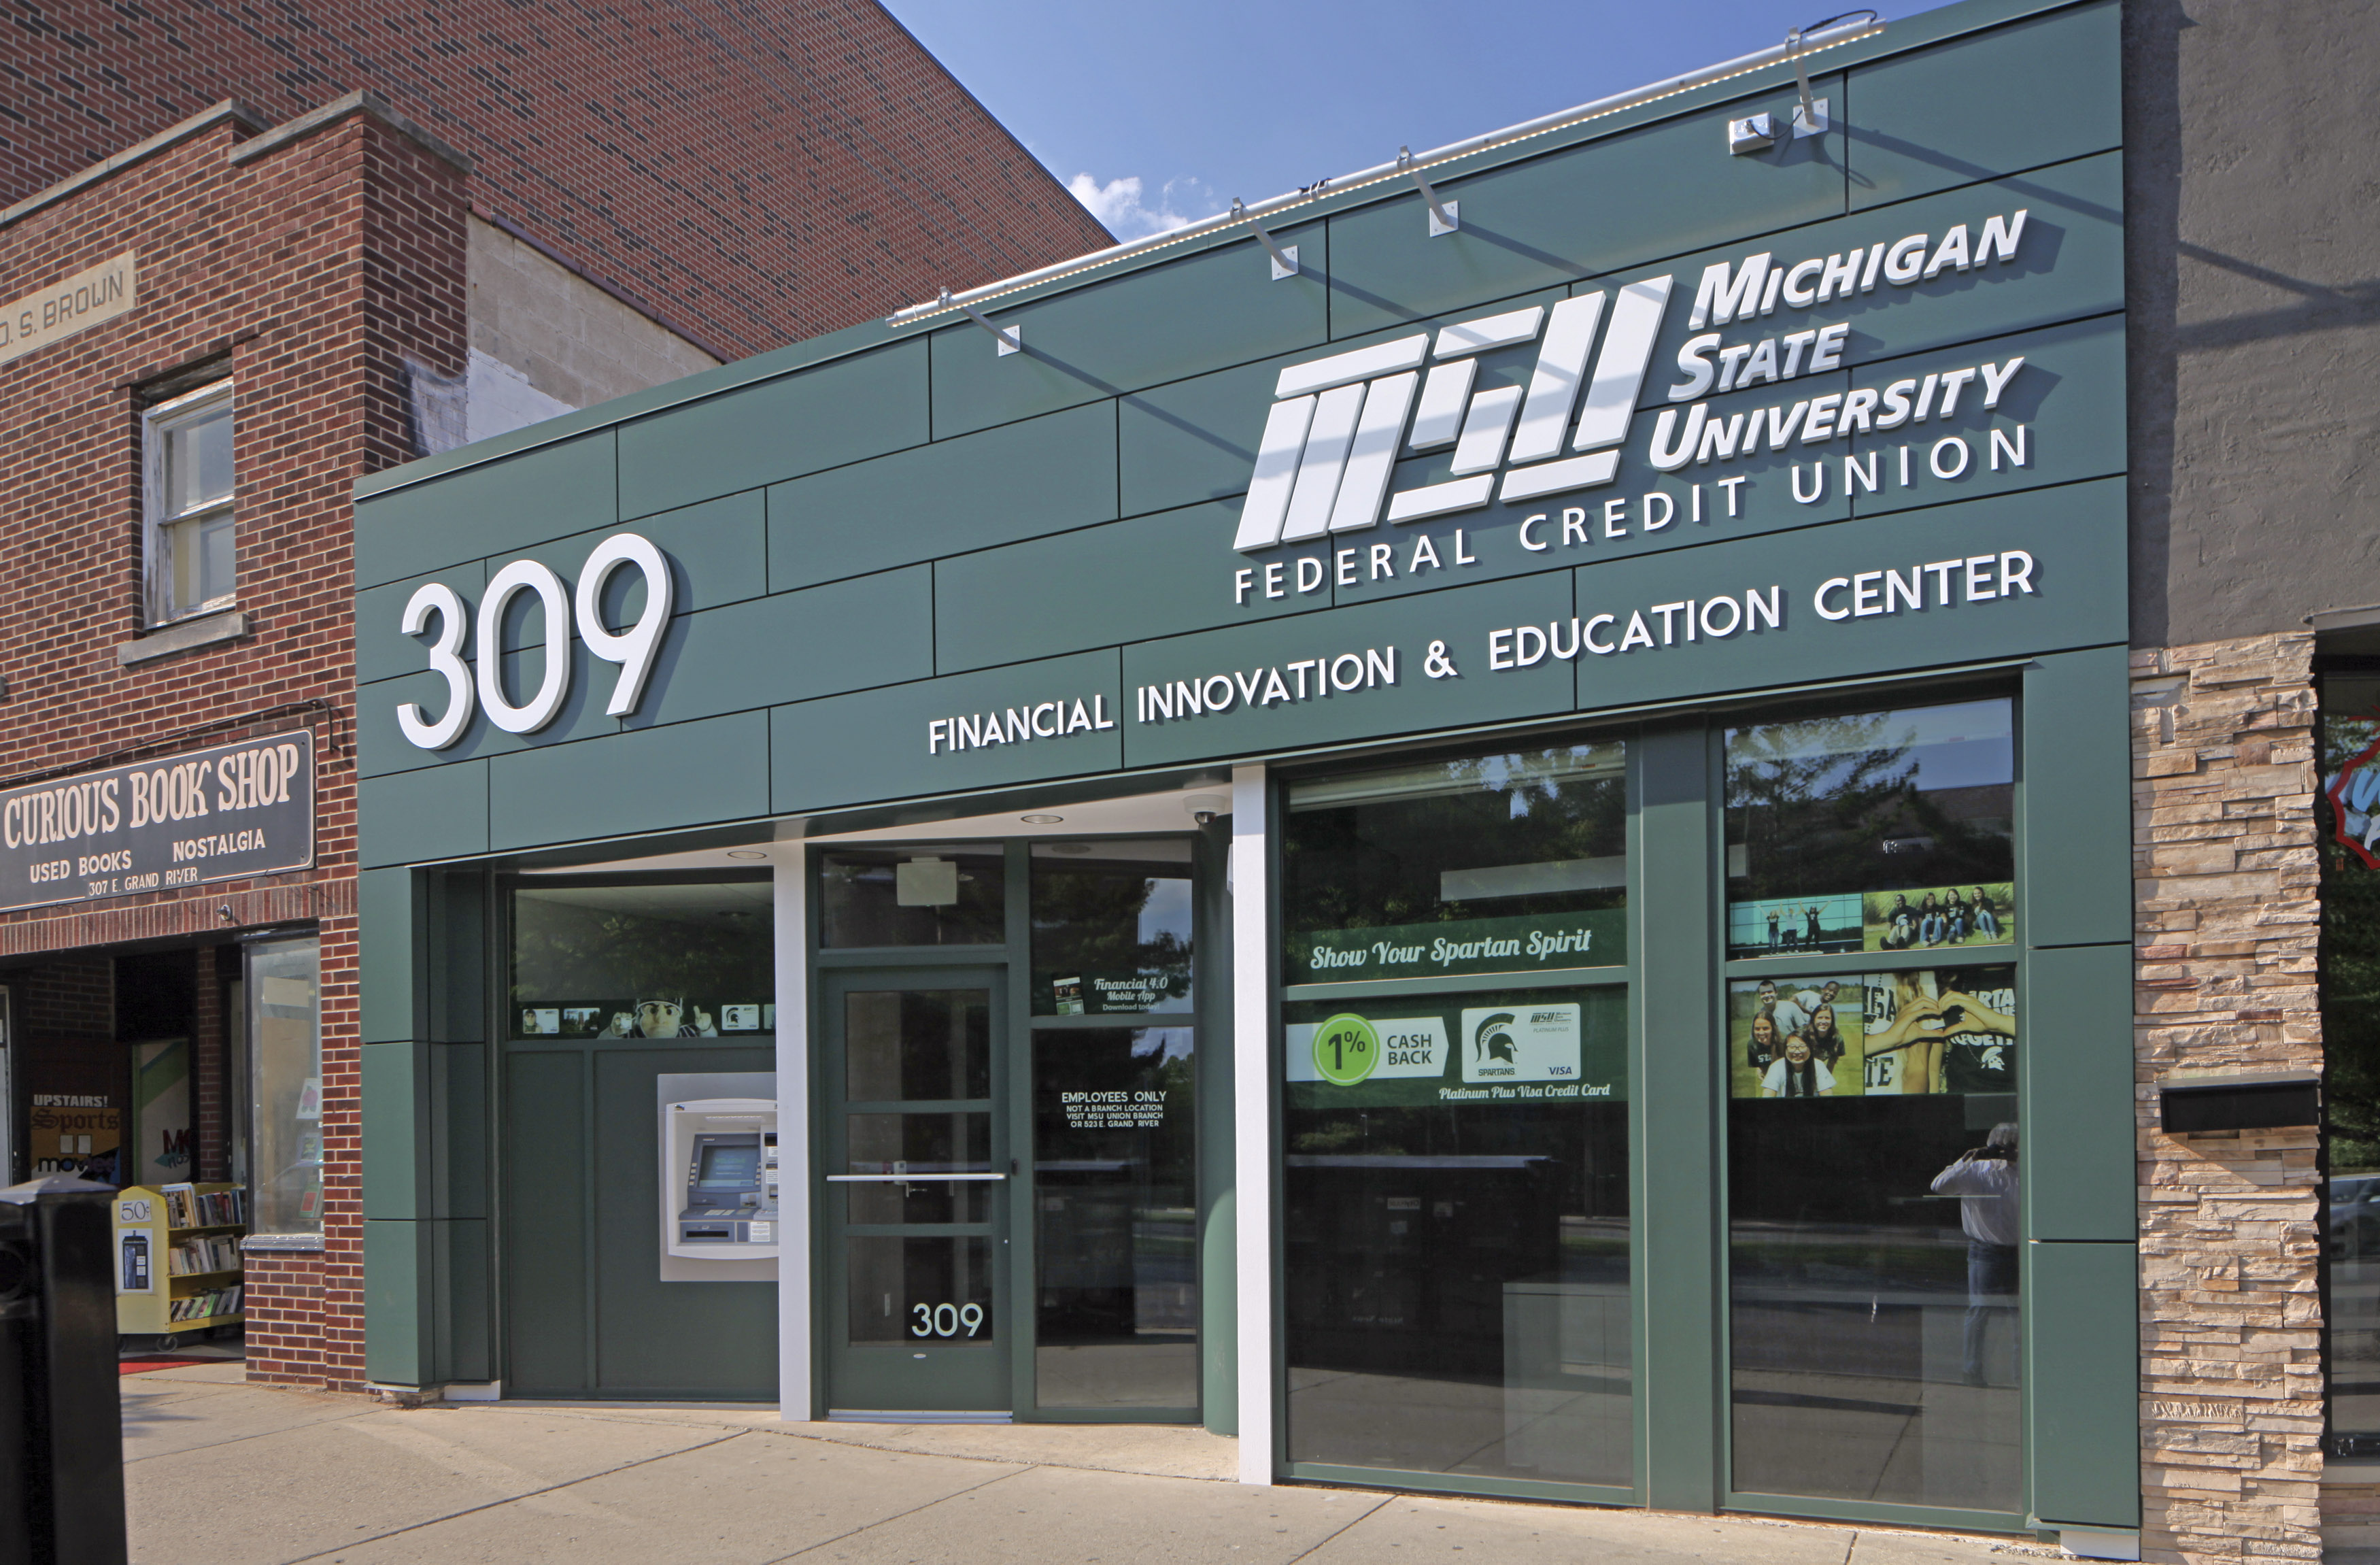 Michigan State University Federal Credit Union Financial Innovation & Education Center